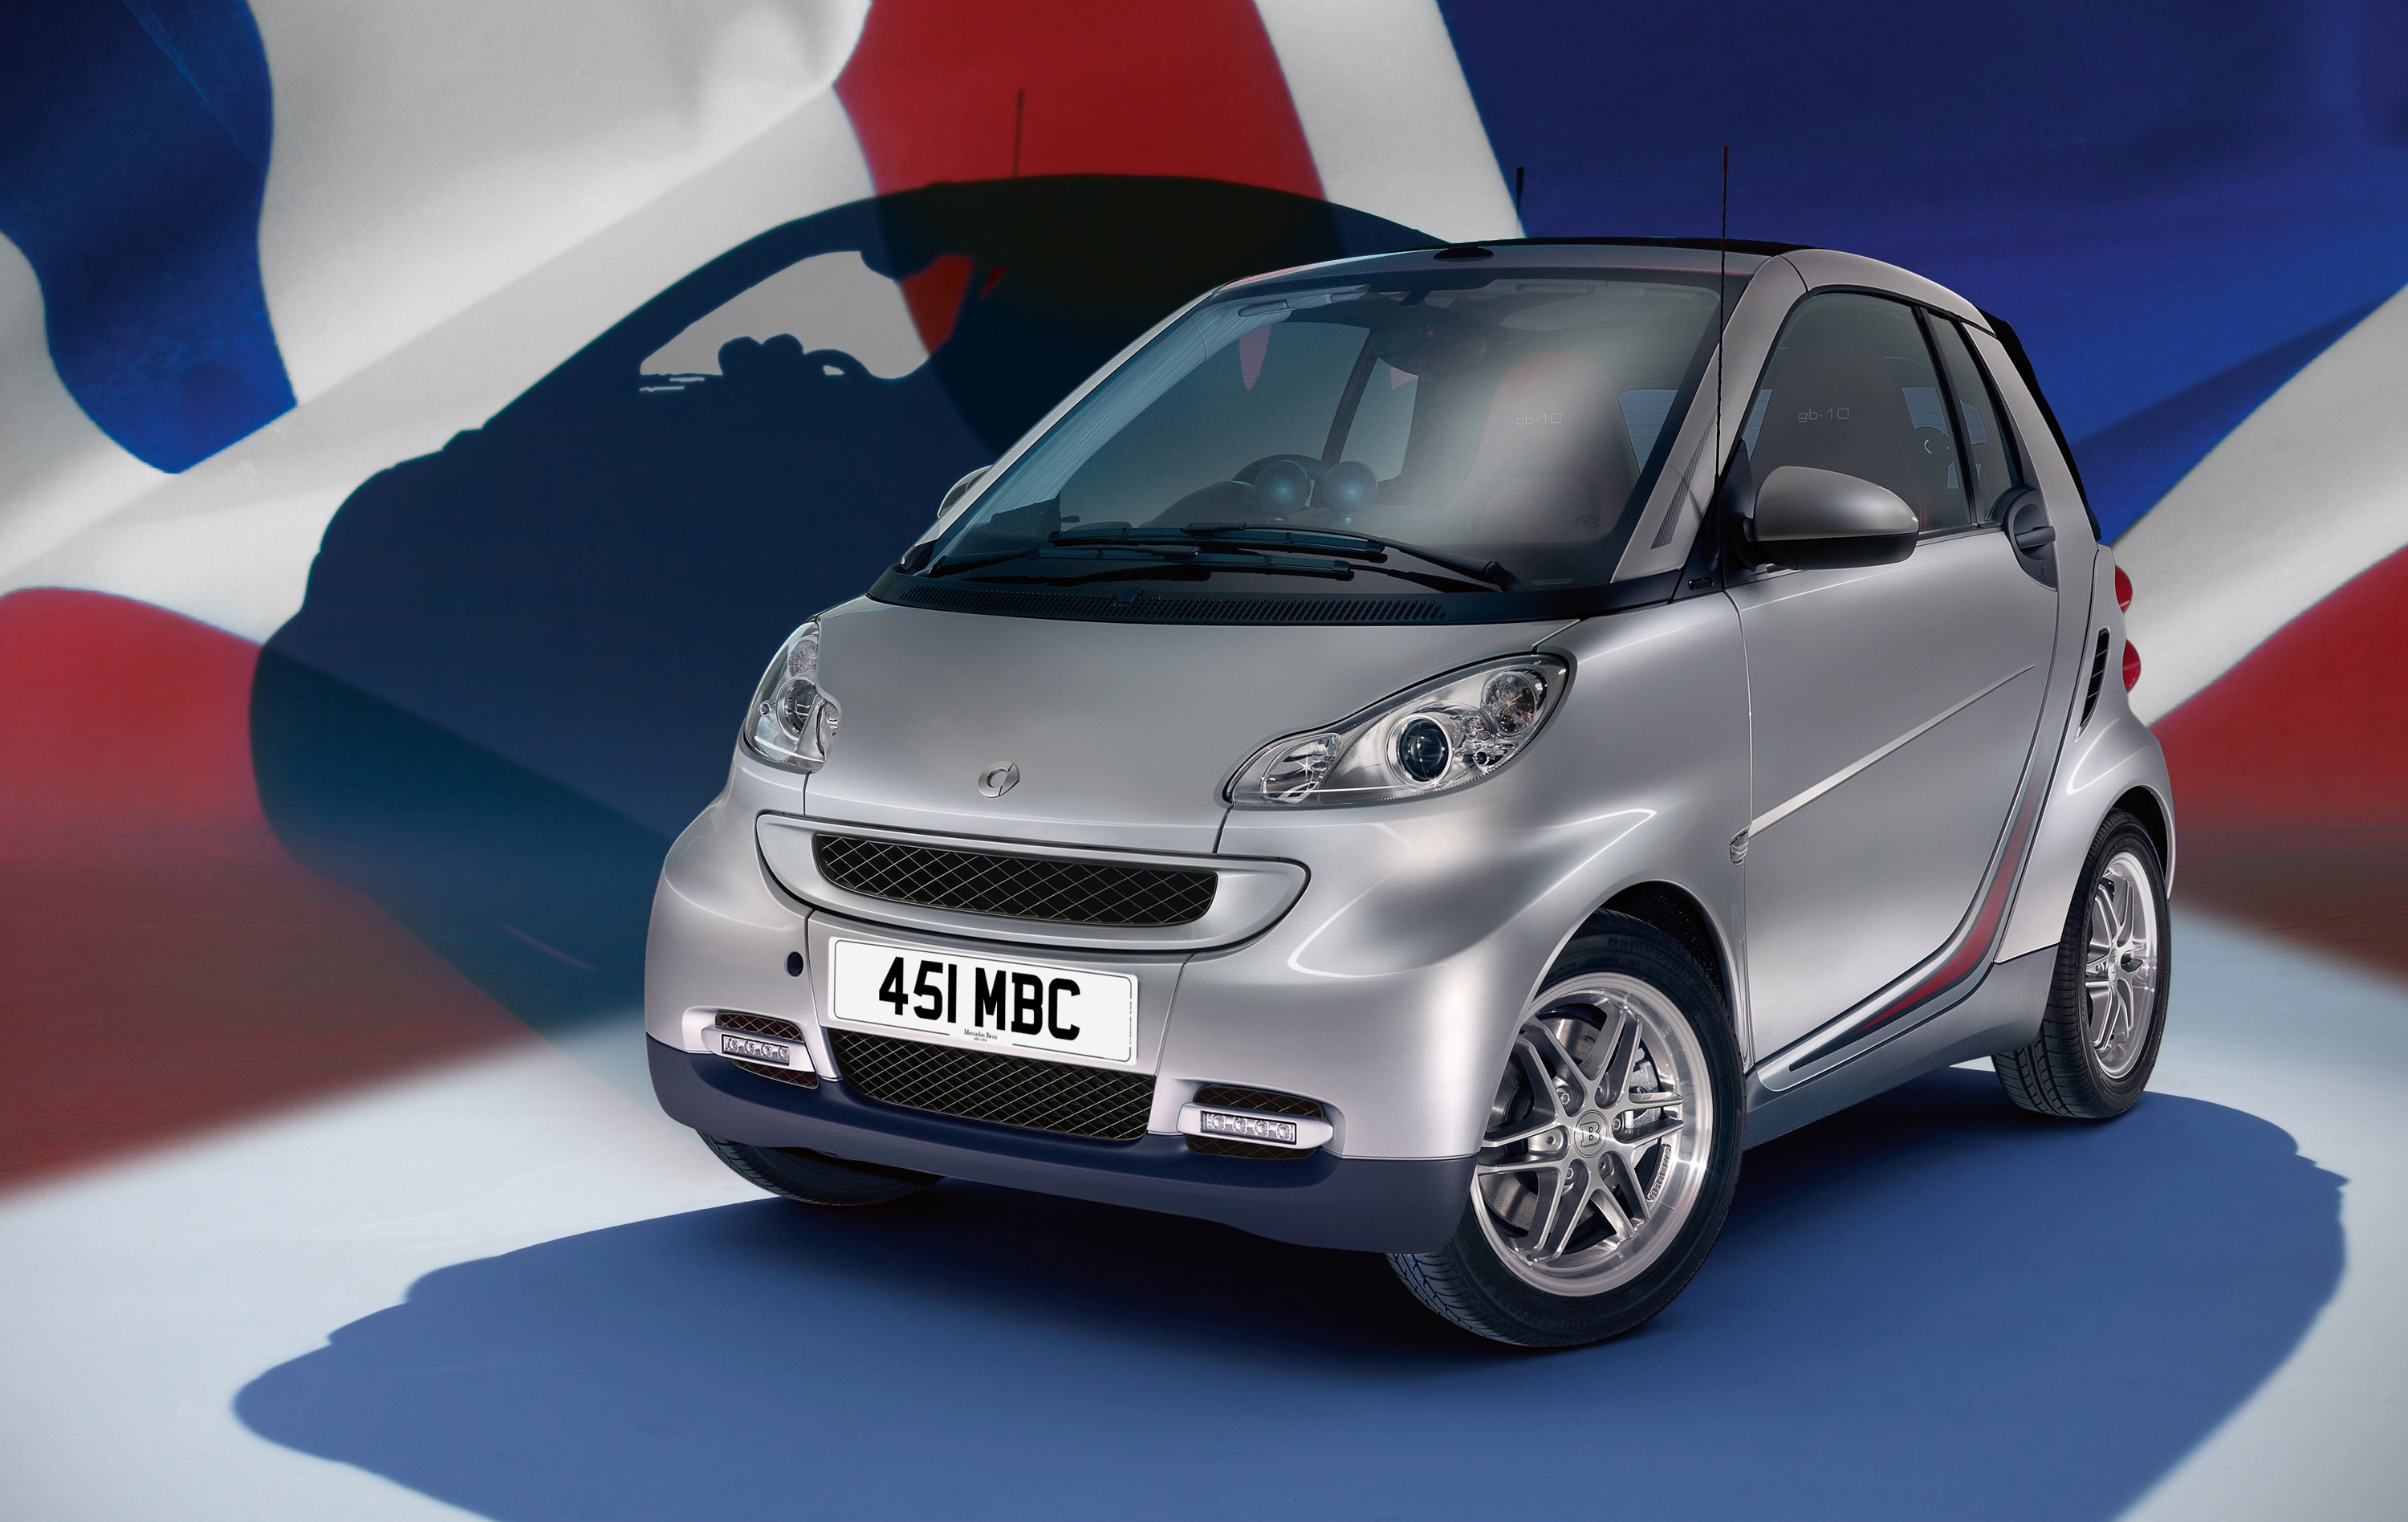 Smart Fortwo gb-10 edition